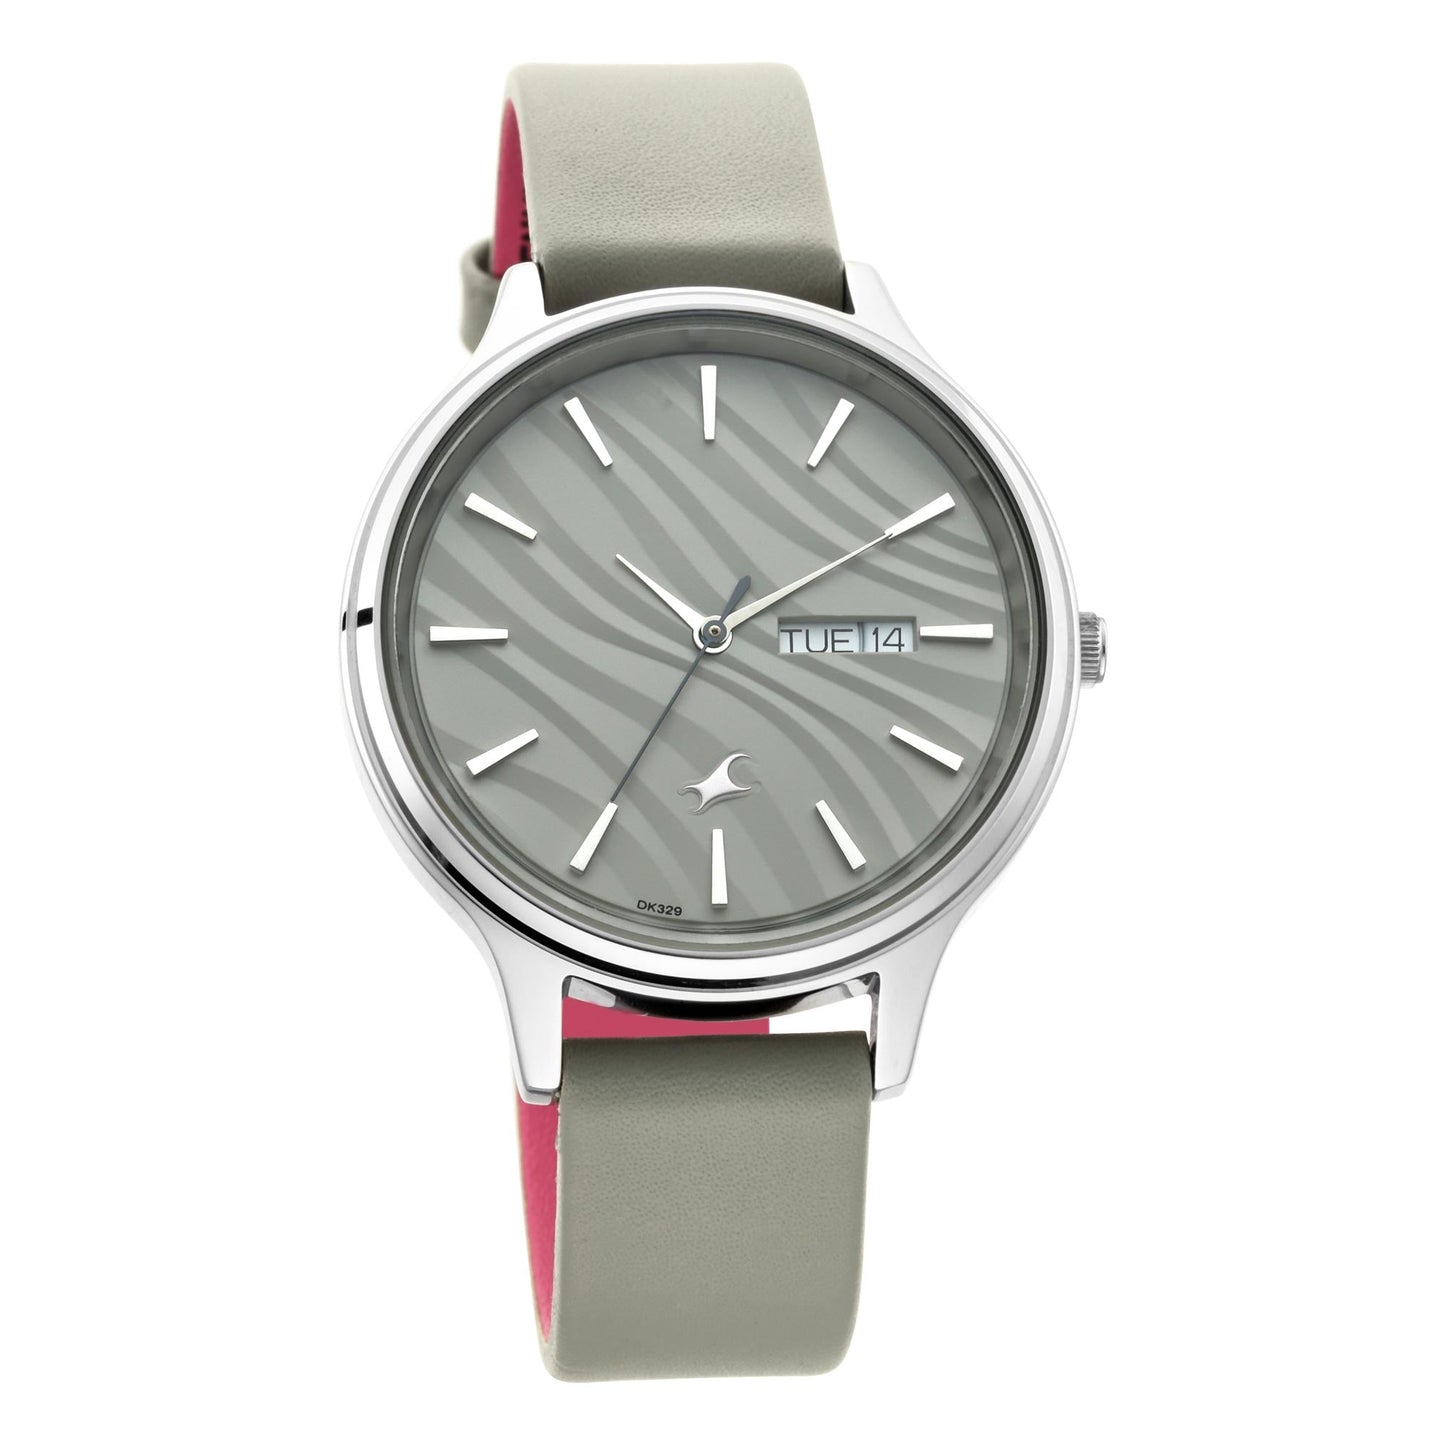 Fastrack Fastrack Ruffles Quartz Analog with Day and Date Grey Dial Leather Strap Watch for Girls